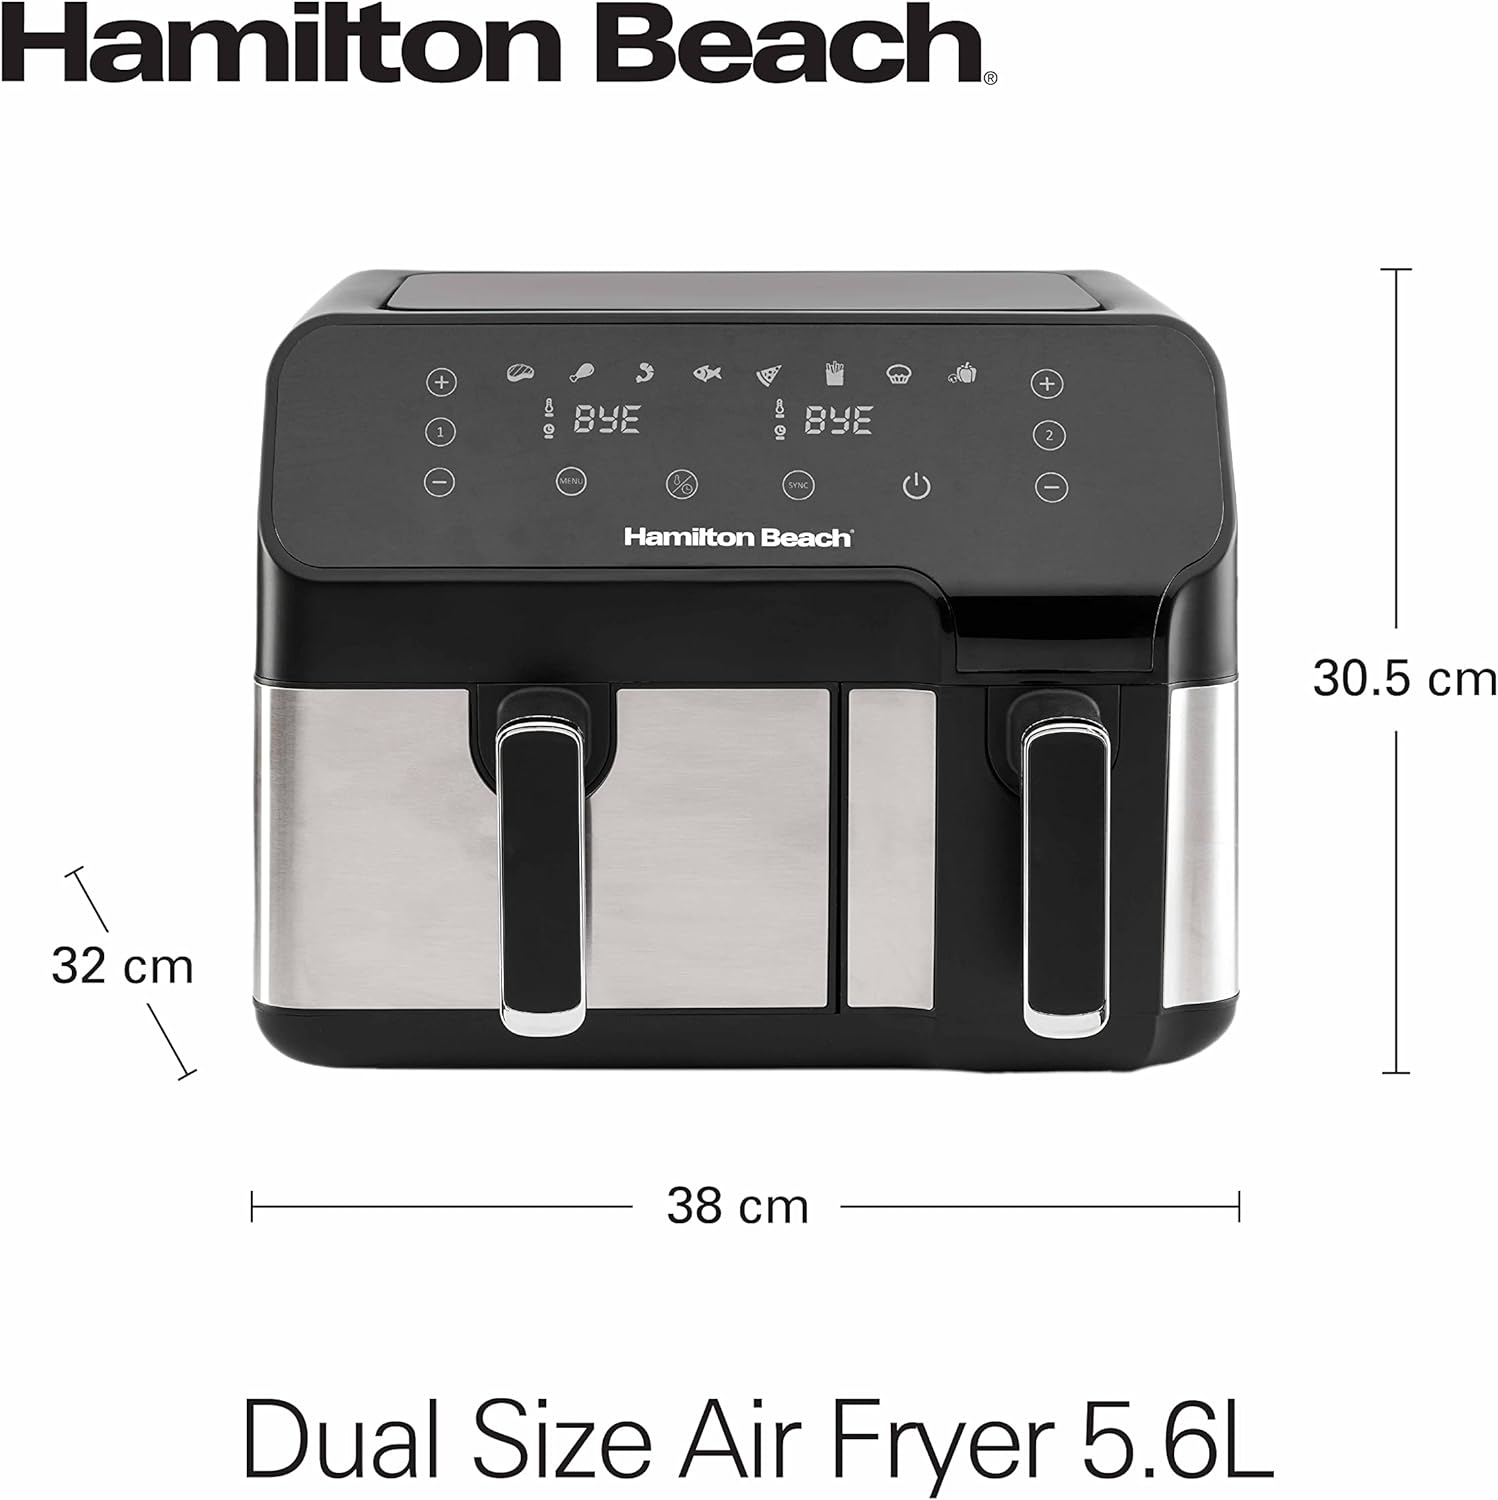 Hamilton Beach Dual Size 8.5L Digital Air Fryer / 5.3L and 3.2L capacity baskets-independently controlled / 1700watts